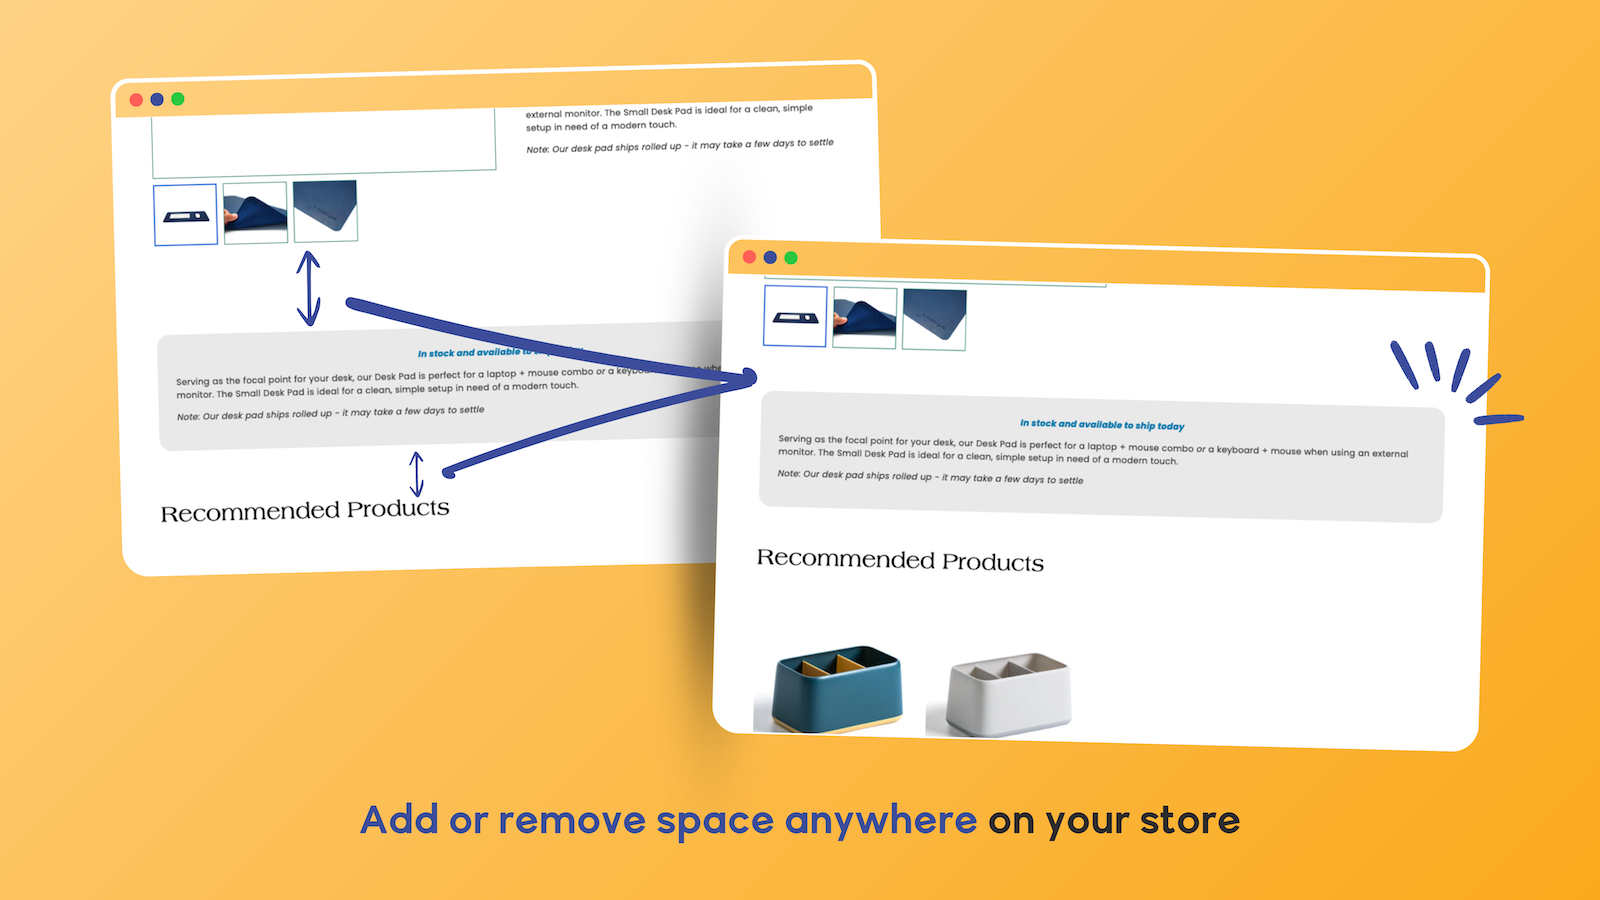 Add and remove space anywhere on your store